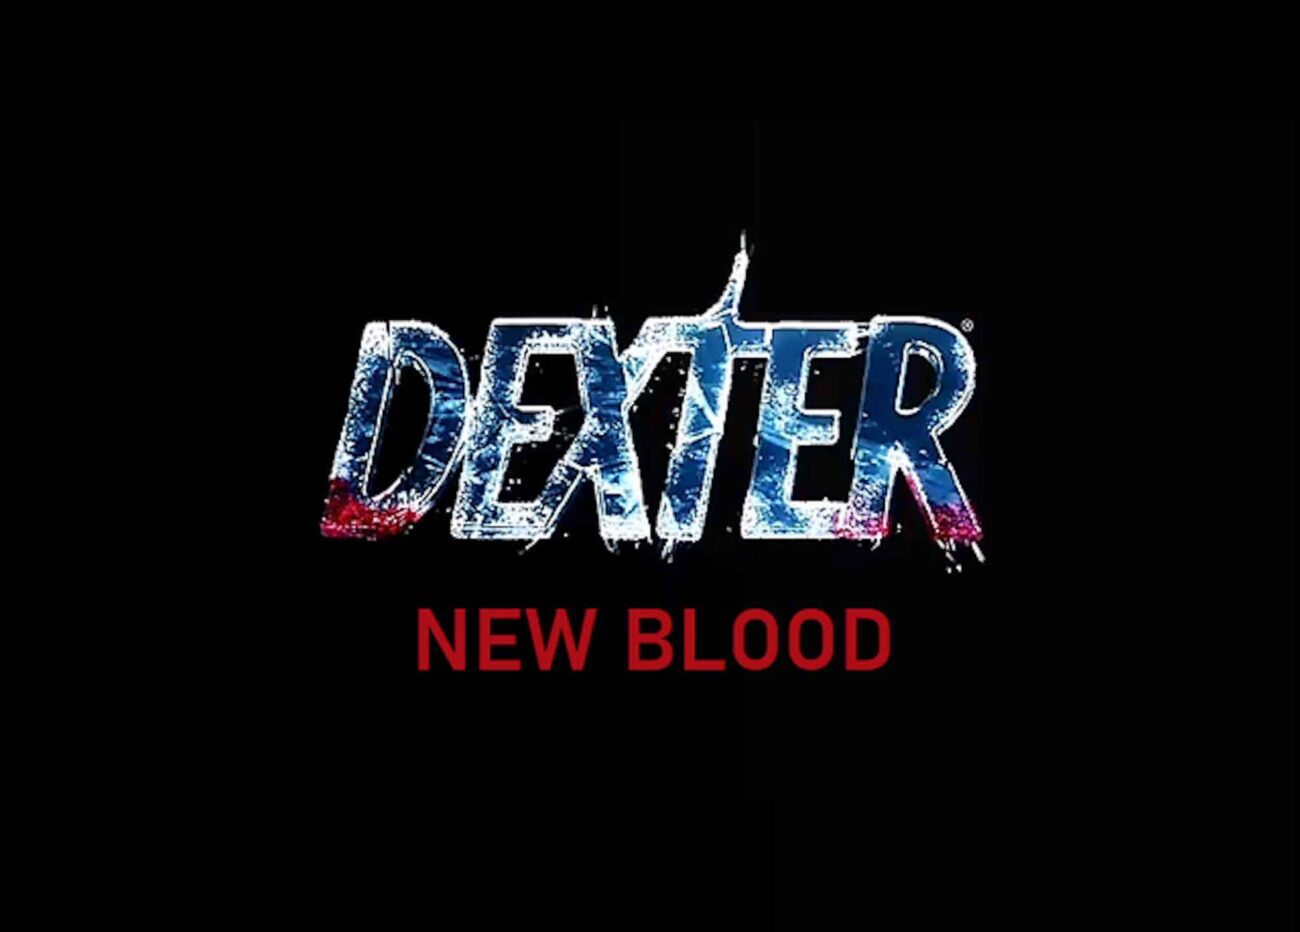 Everyone's favorite serial killer Dexter returns! Examine the trailer for the upcoming bloody revival Showtime series.